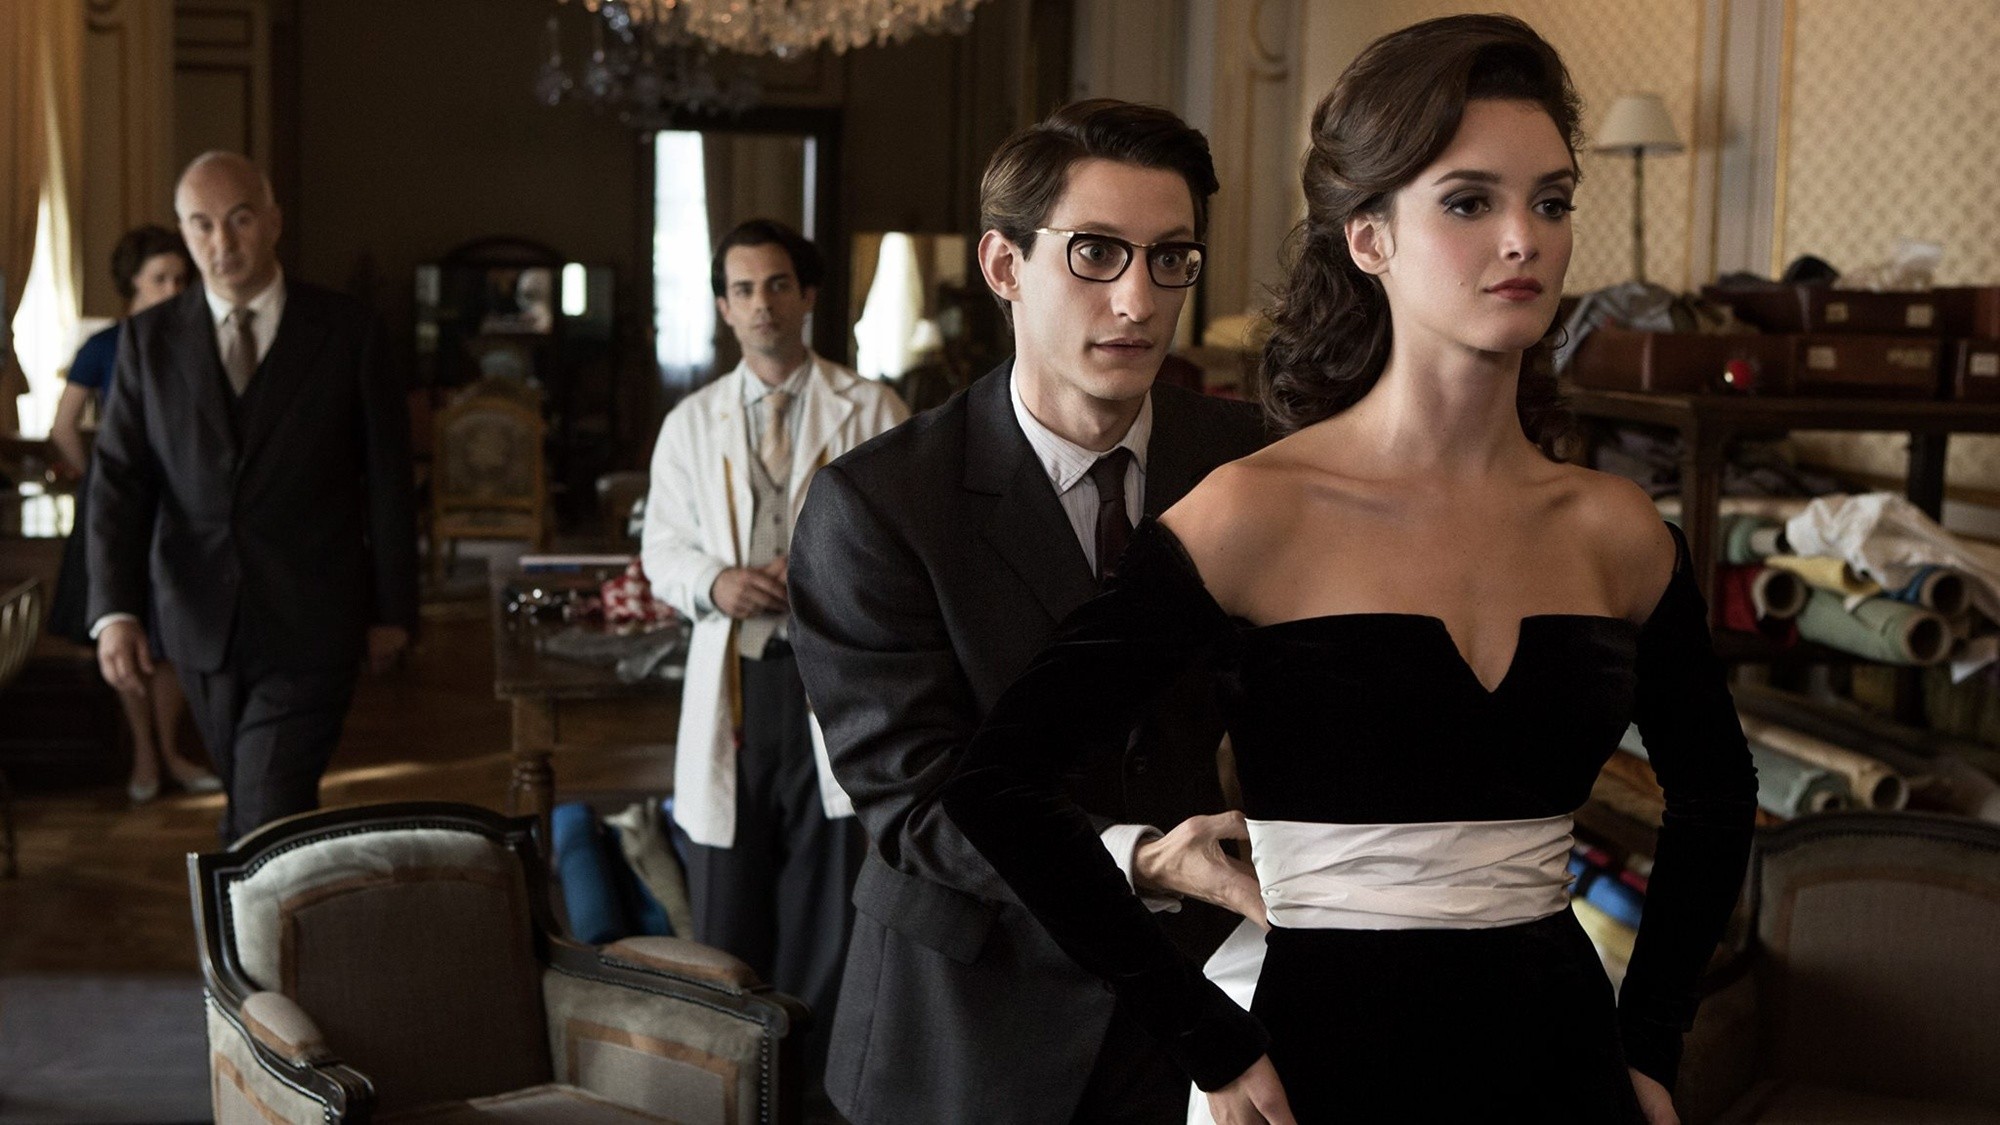 Pierre Niney stars as Yves Saint Laurent and Charlotte Le Bon stars as Victoire Doutreleau in The Weinstein Company's Yves Saint Laurent (2014)